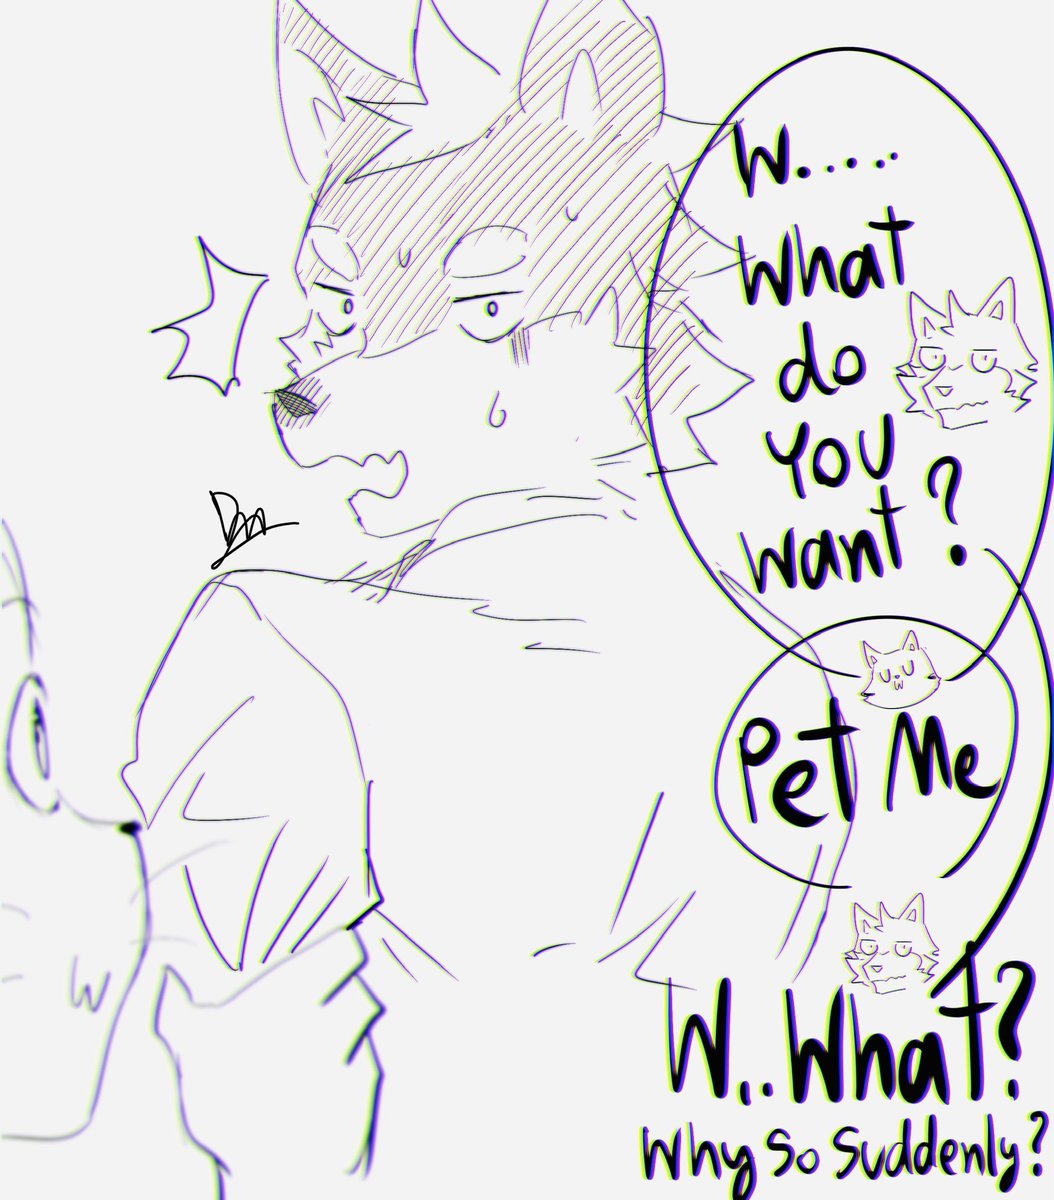 Some doodle that I made if I could able to draw comic
It's about the Doggo was in debt by Cat's dad which is a mafia gang however they catto&doggo knew each other since young somehow, so Catto helped+asked Doggo for "100 favors" substitute to be free from debt as condition 